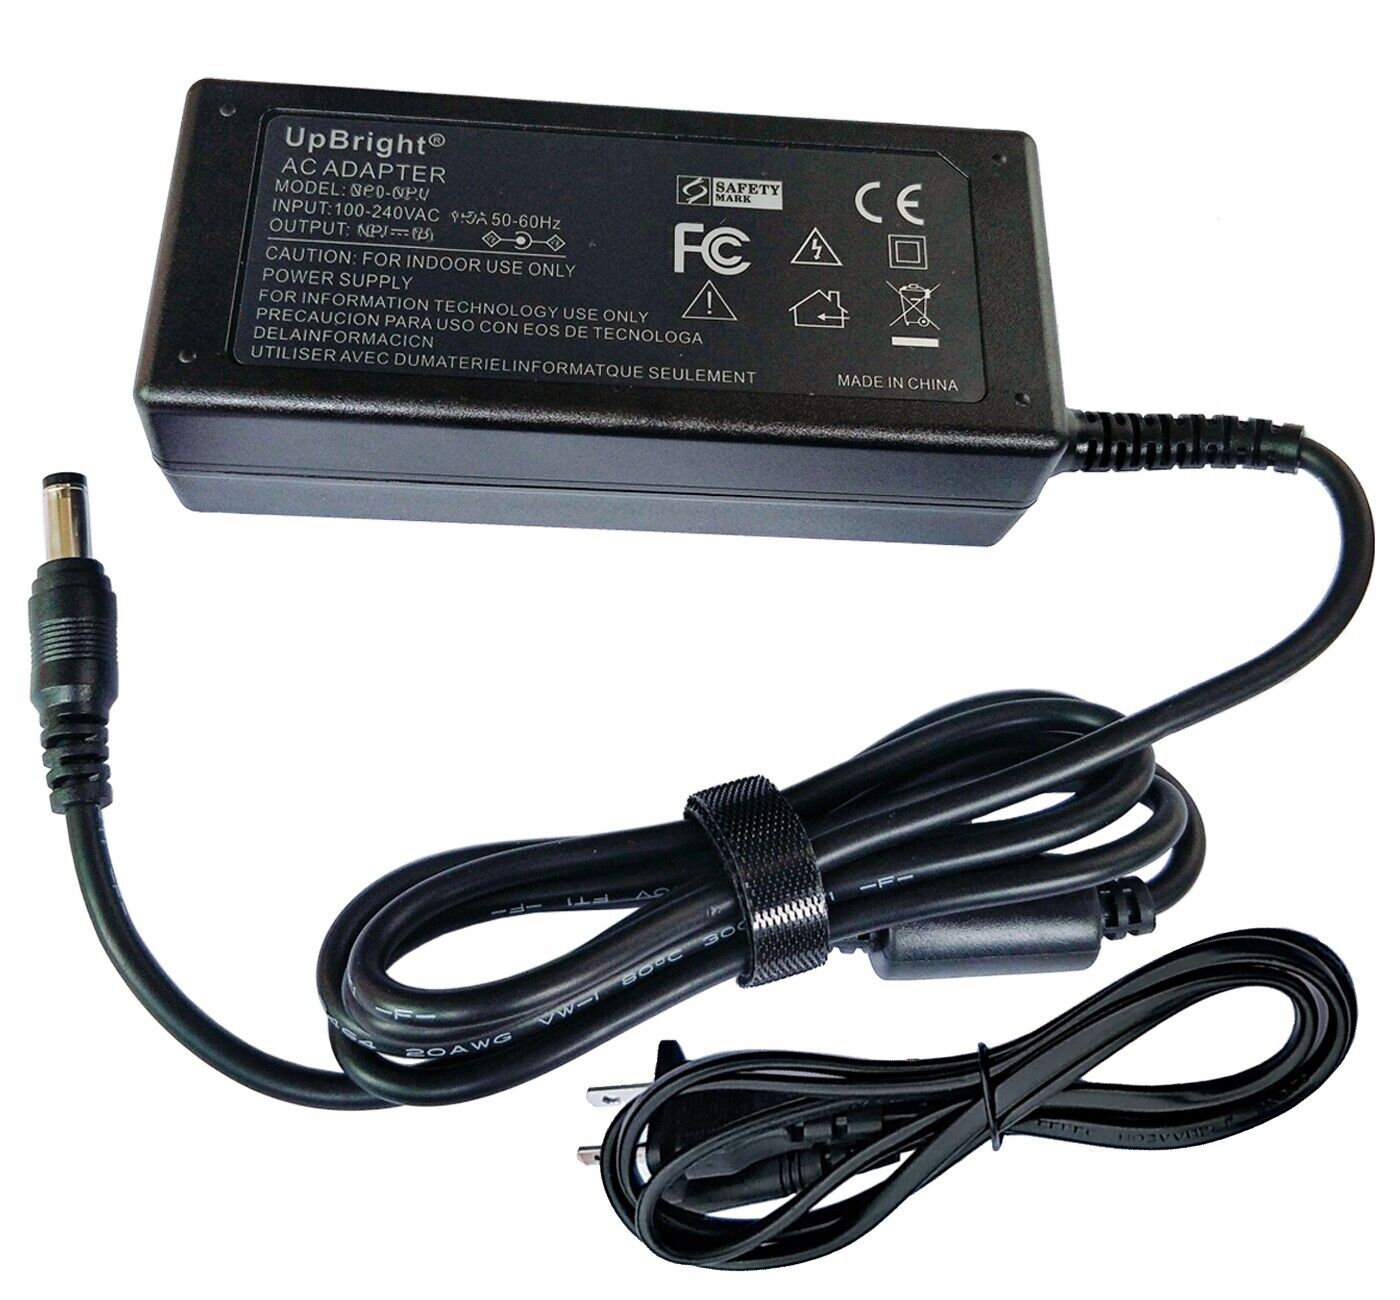 AC/DC Adapter For Devon ex extriCare 3600 Negative Pressure Wound Therapy System